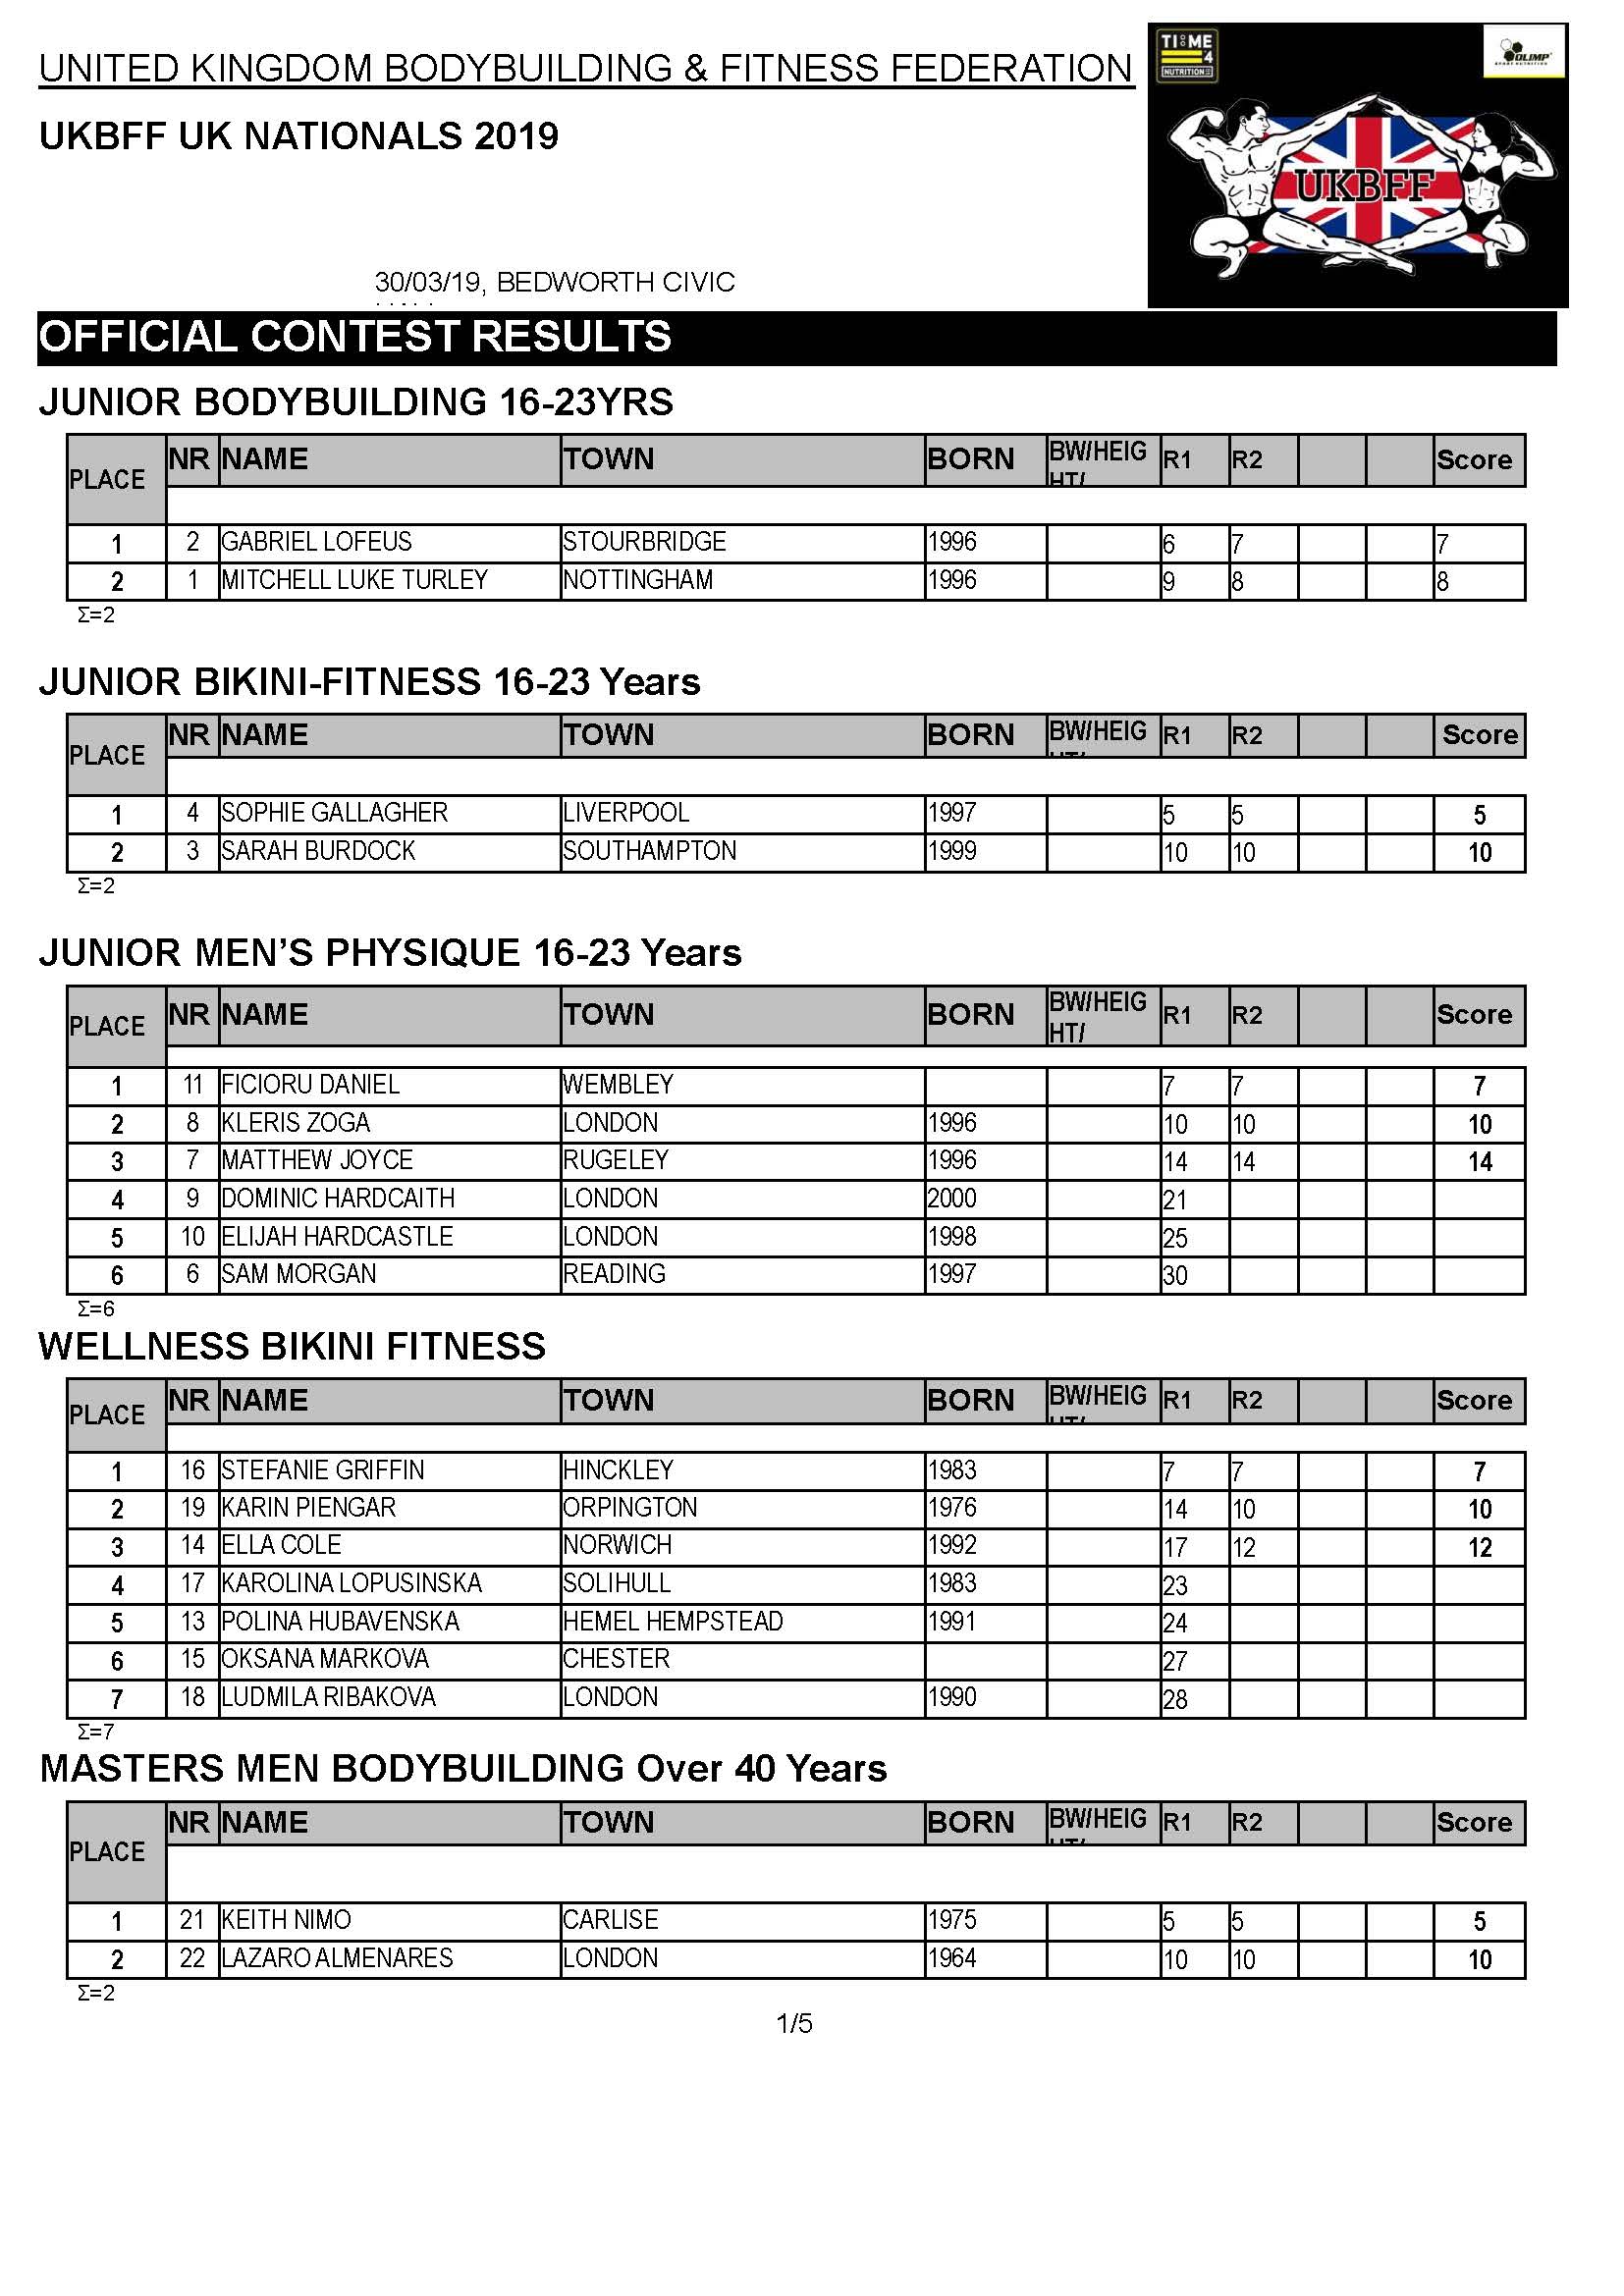 2019 UK NATIONALS RESULTS_Page_1.jpg